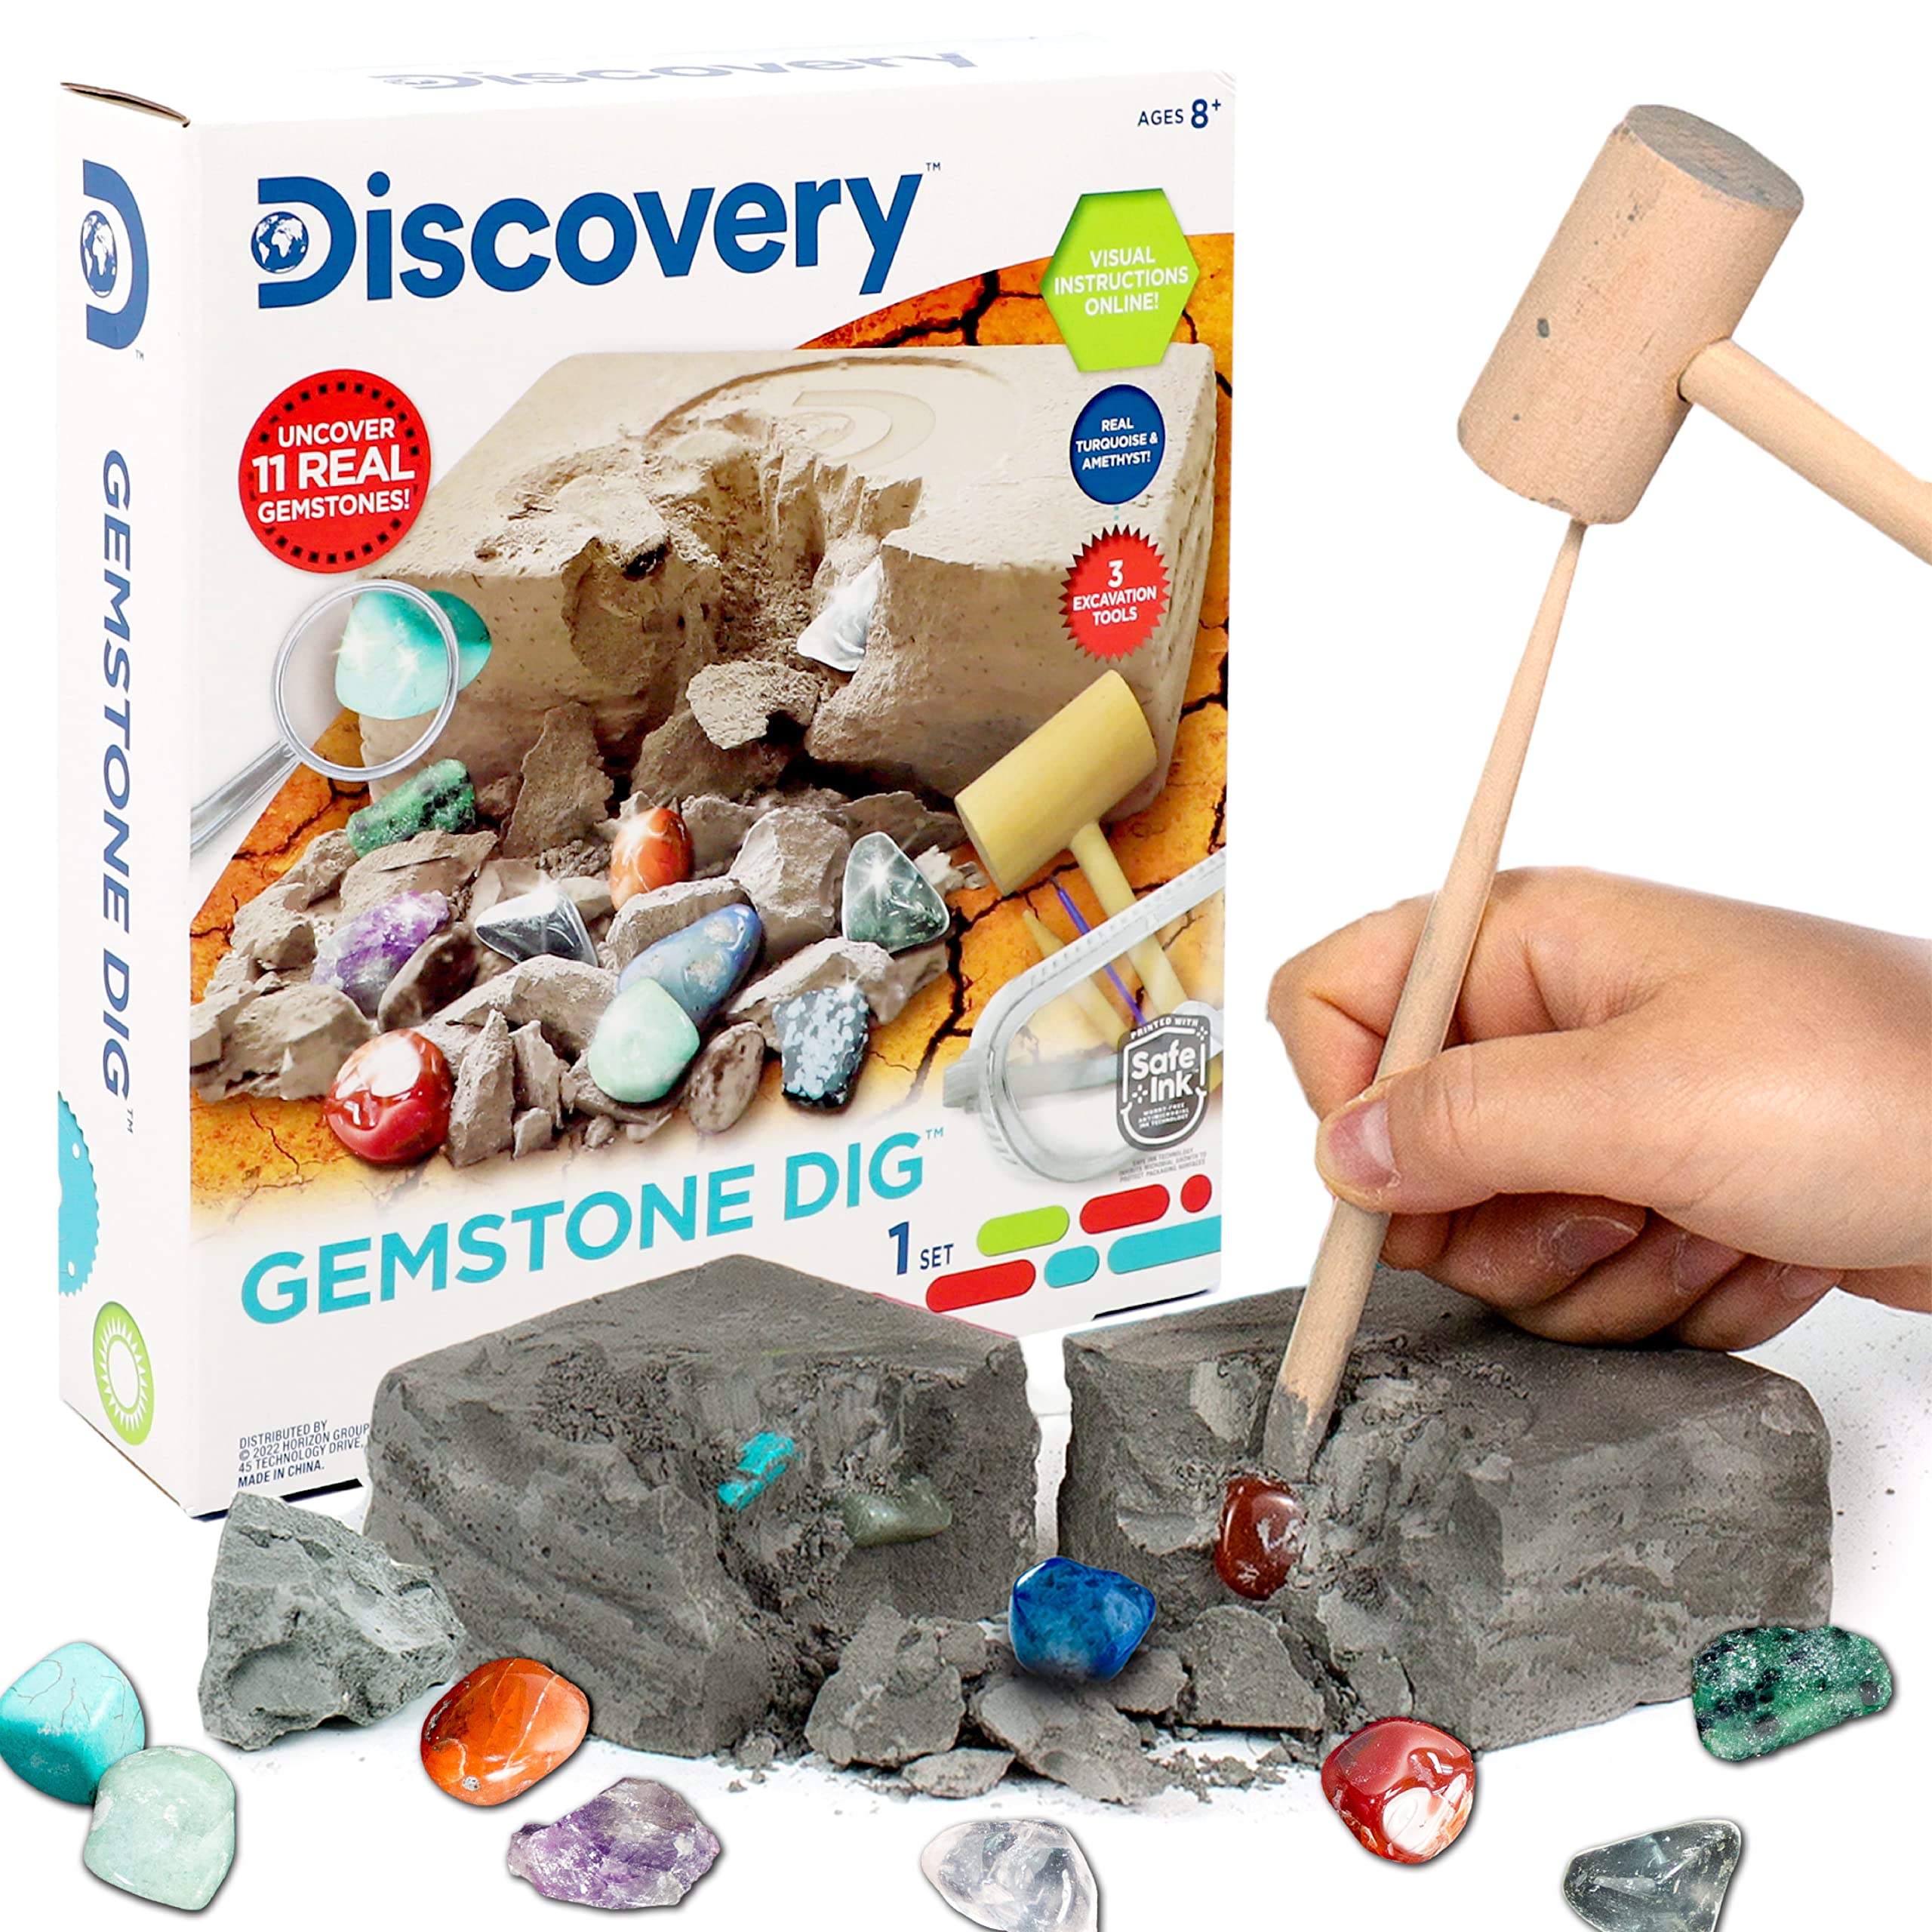 Book Cover Discovery Kids Gemstone Dig Stem Science Kit by Horizon Group Usa, Excavate, Dig & Reveal 11 Real Gemstones, Includes Goggles, Excavation Tools, Streak Plate, Magnifying Glass & More